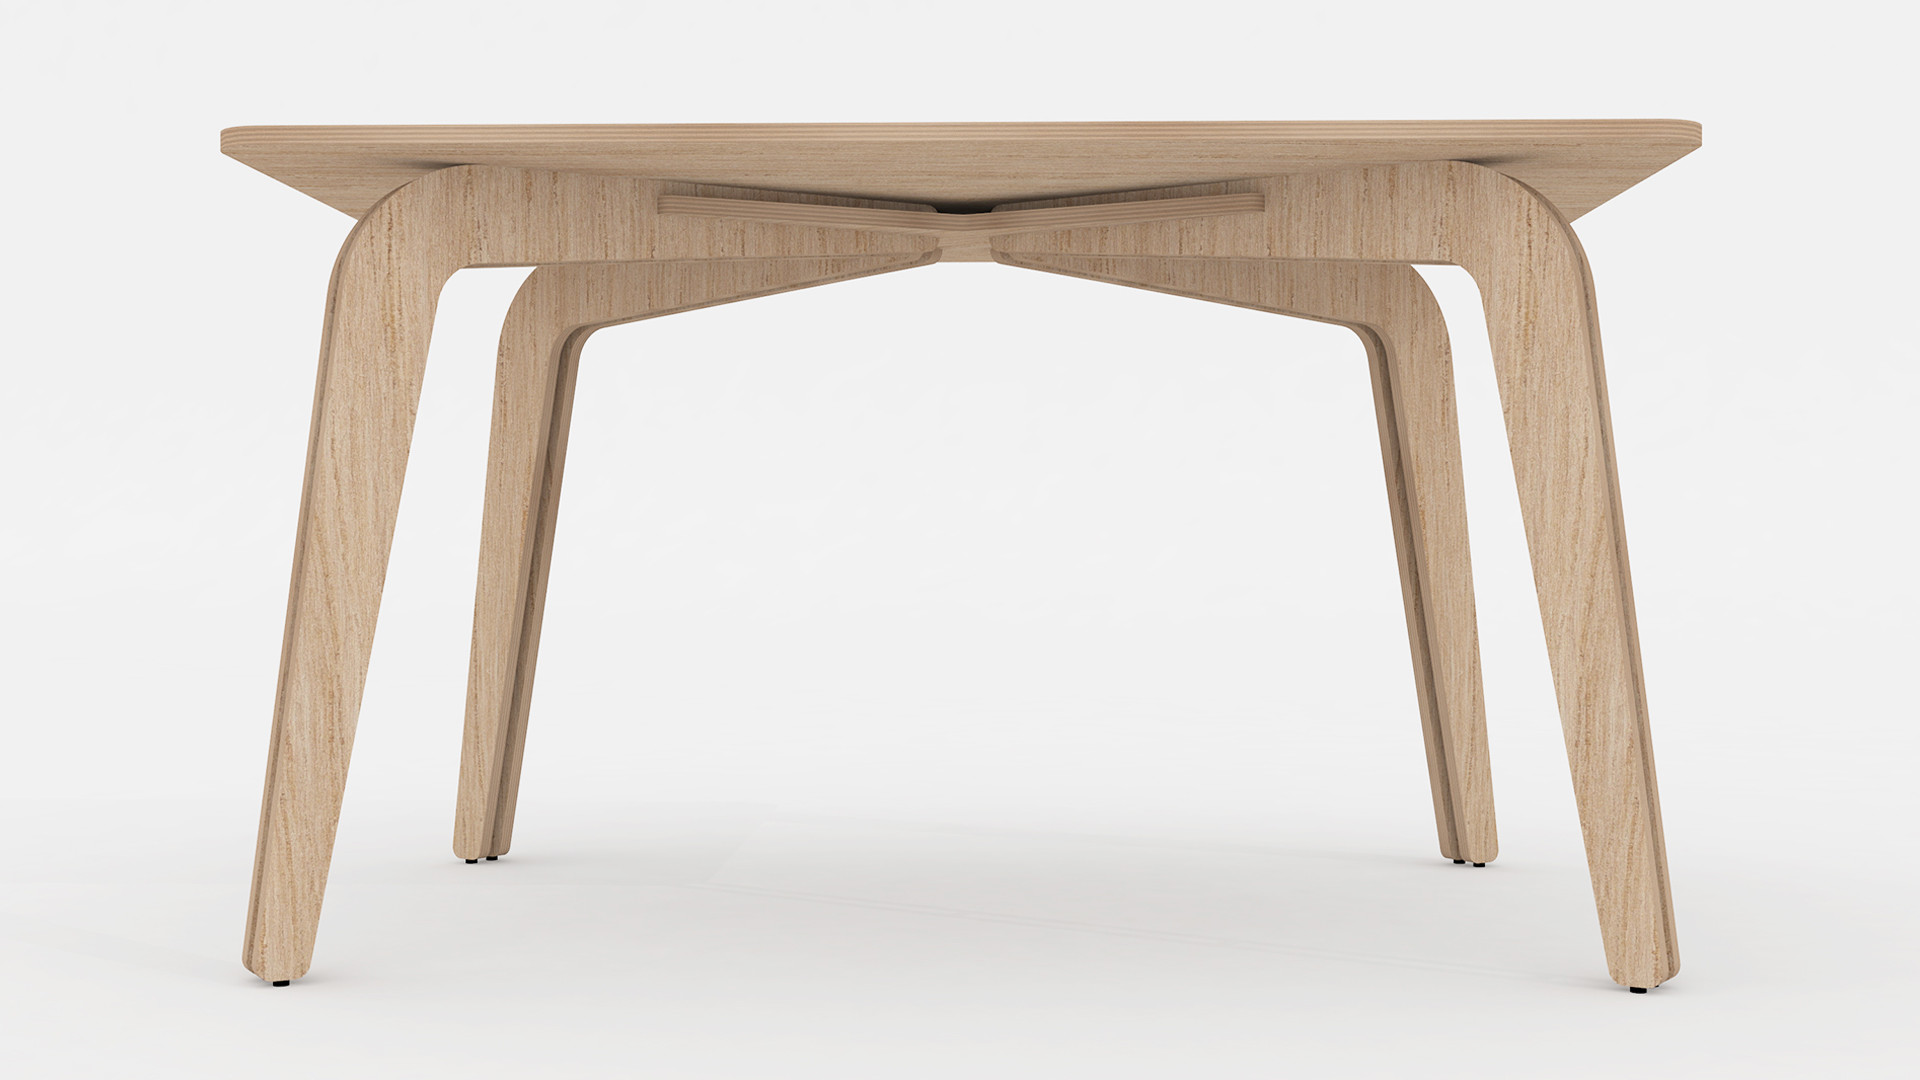 Product Design – Tables